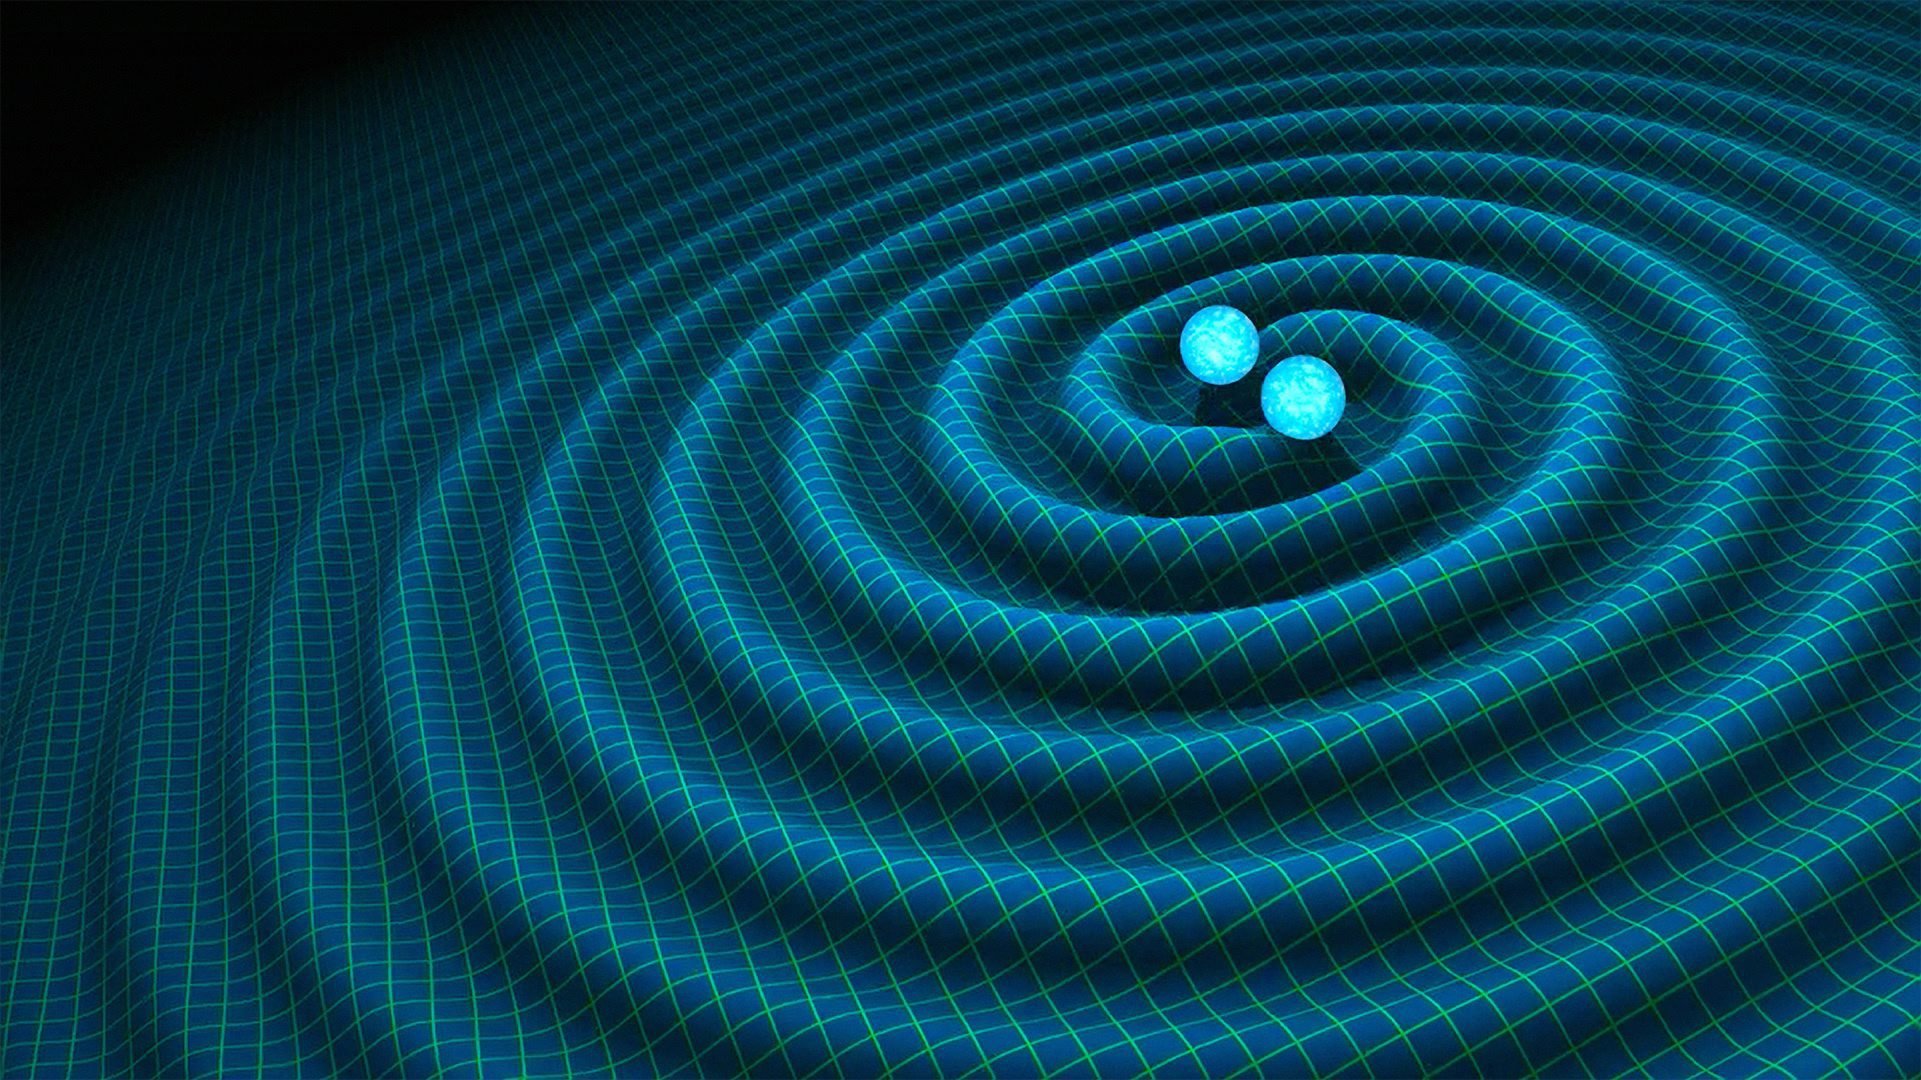 Evidence of gravitational waves discovered, US physicists say